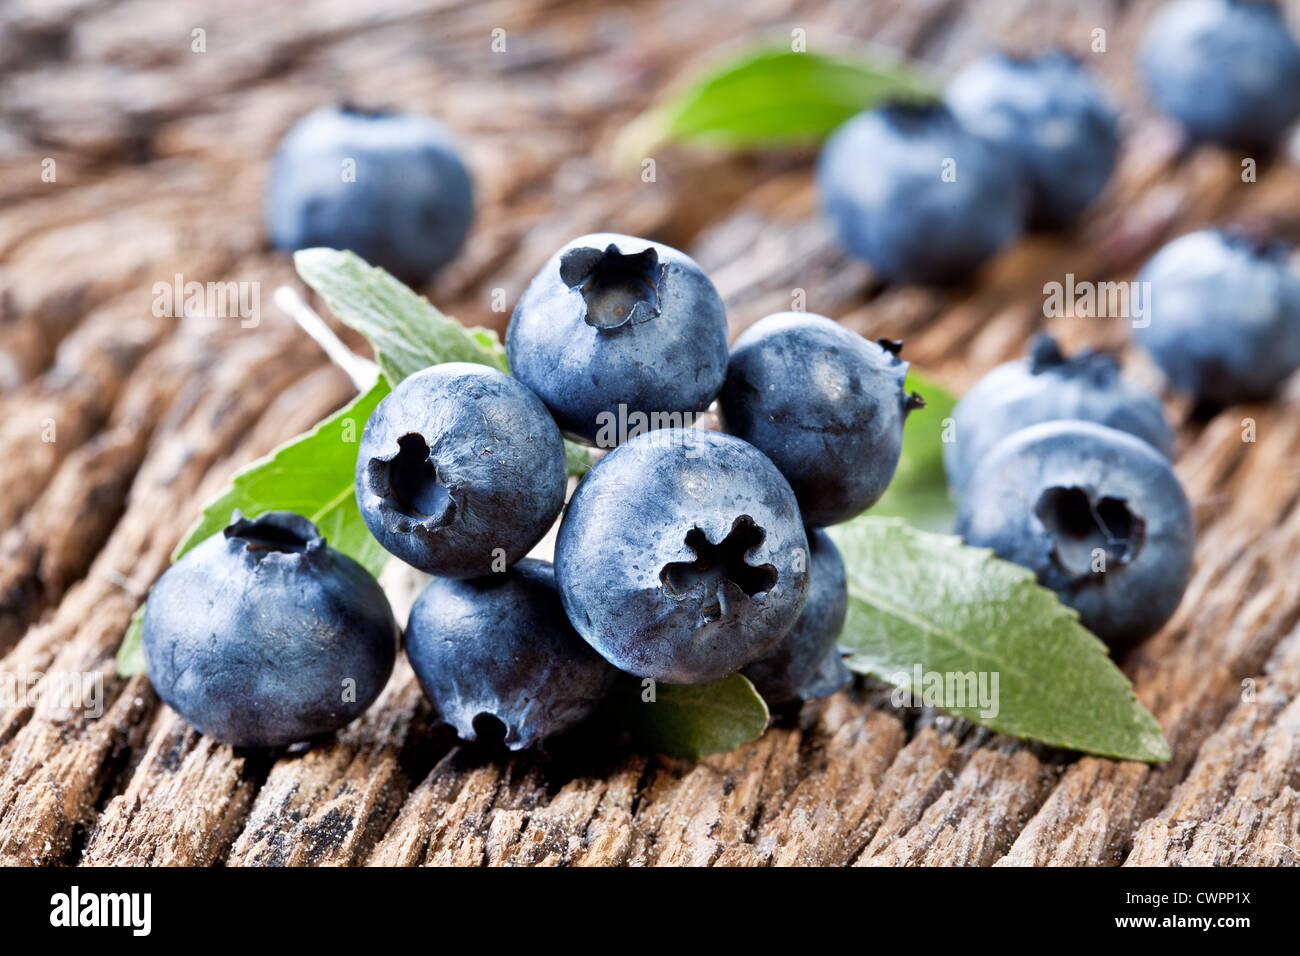 Blueberries with leaves on a old wooden table. Stock Photo